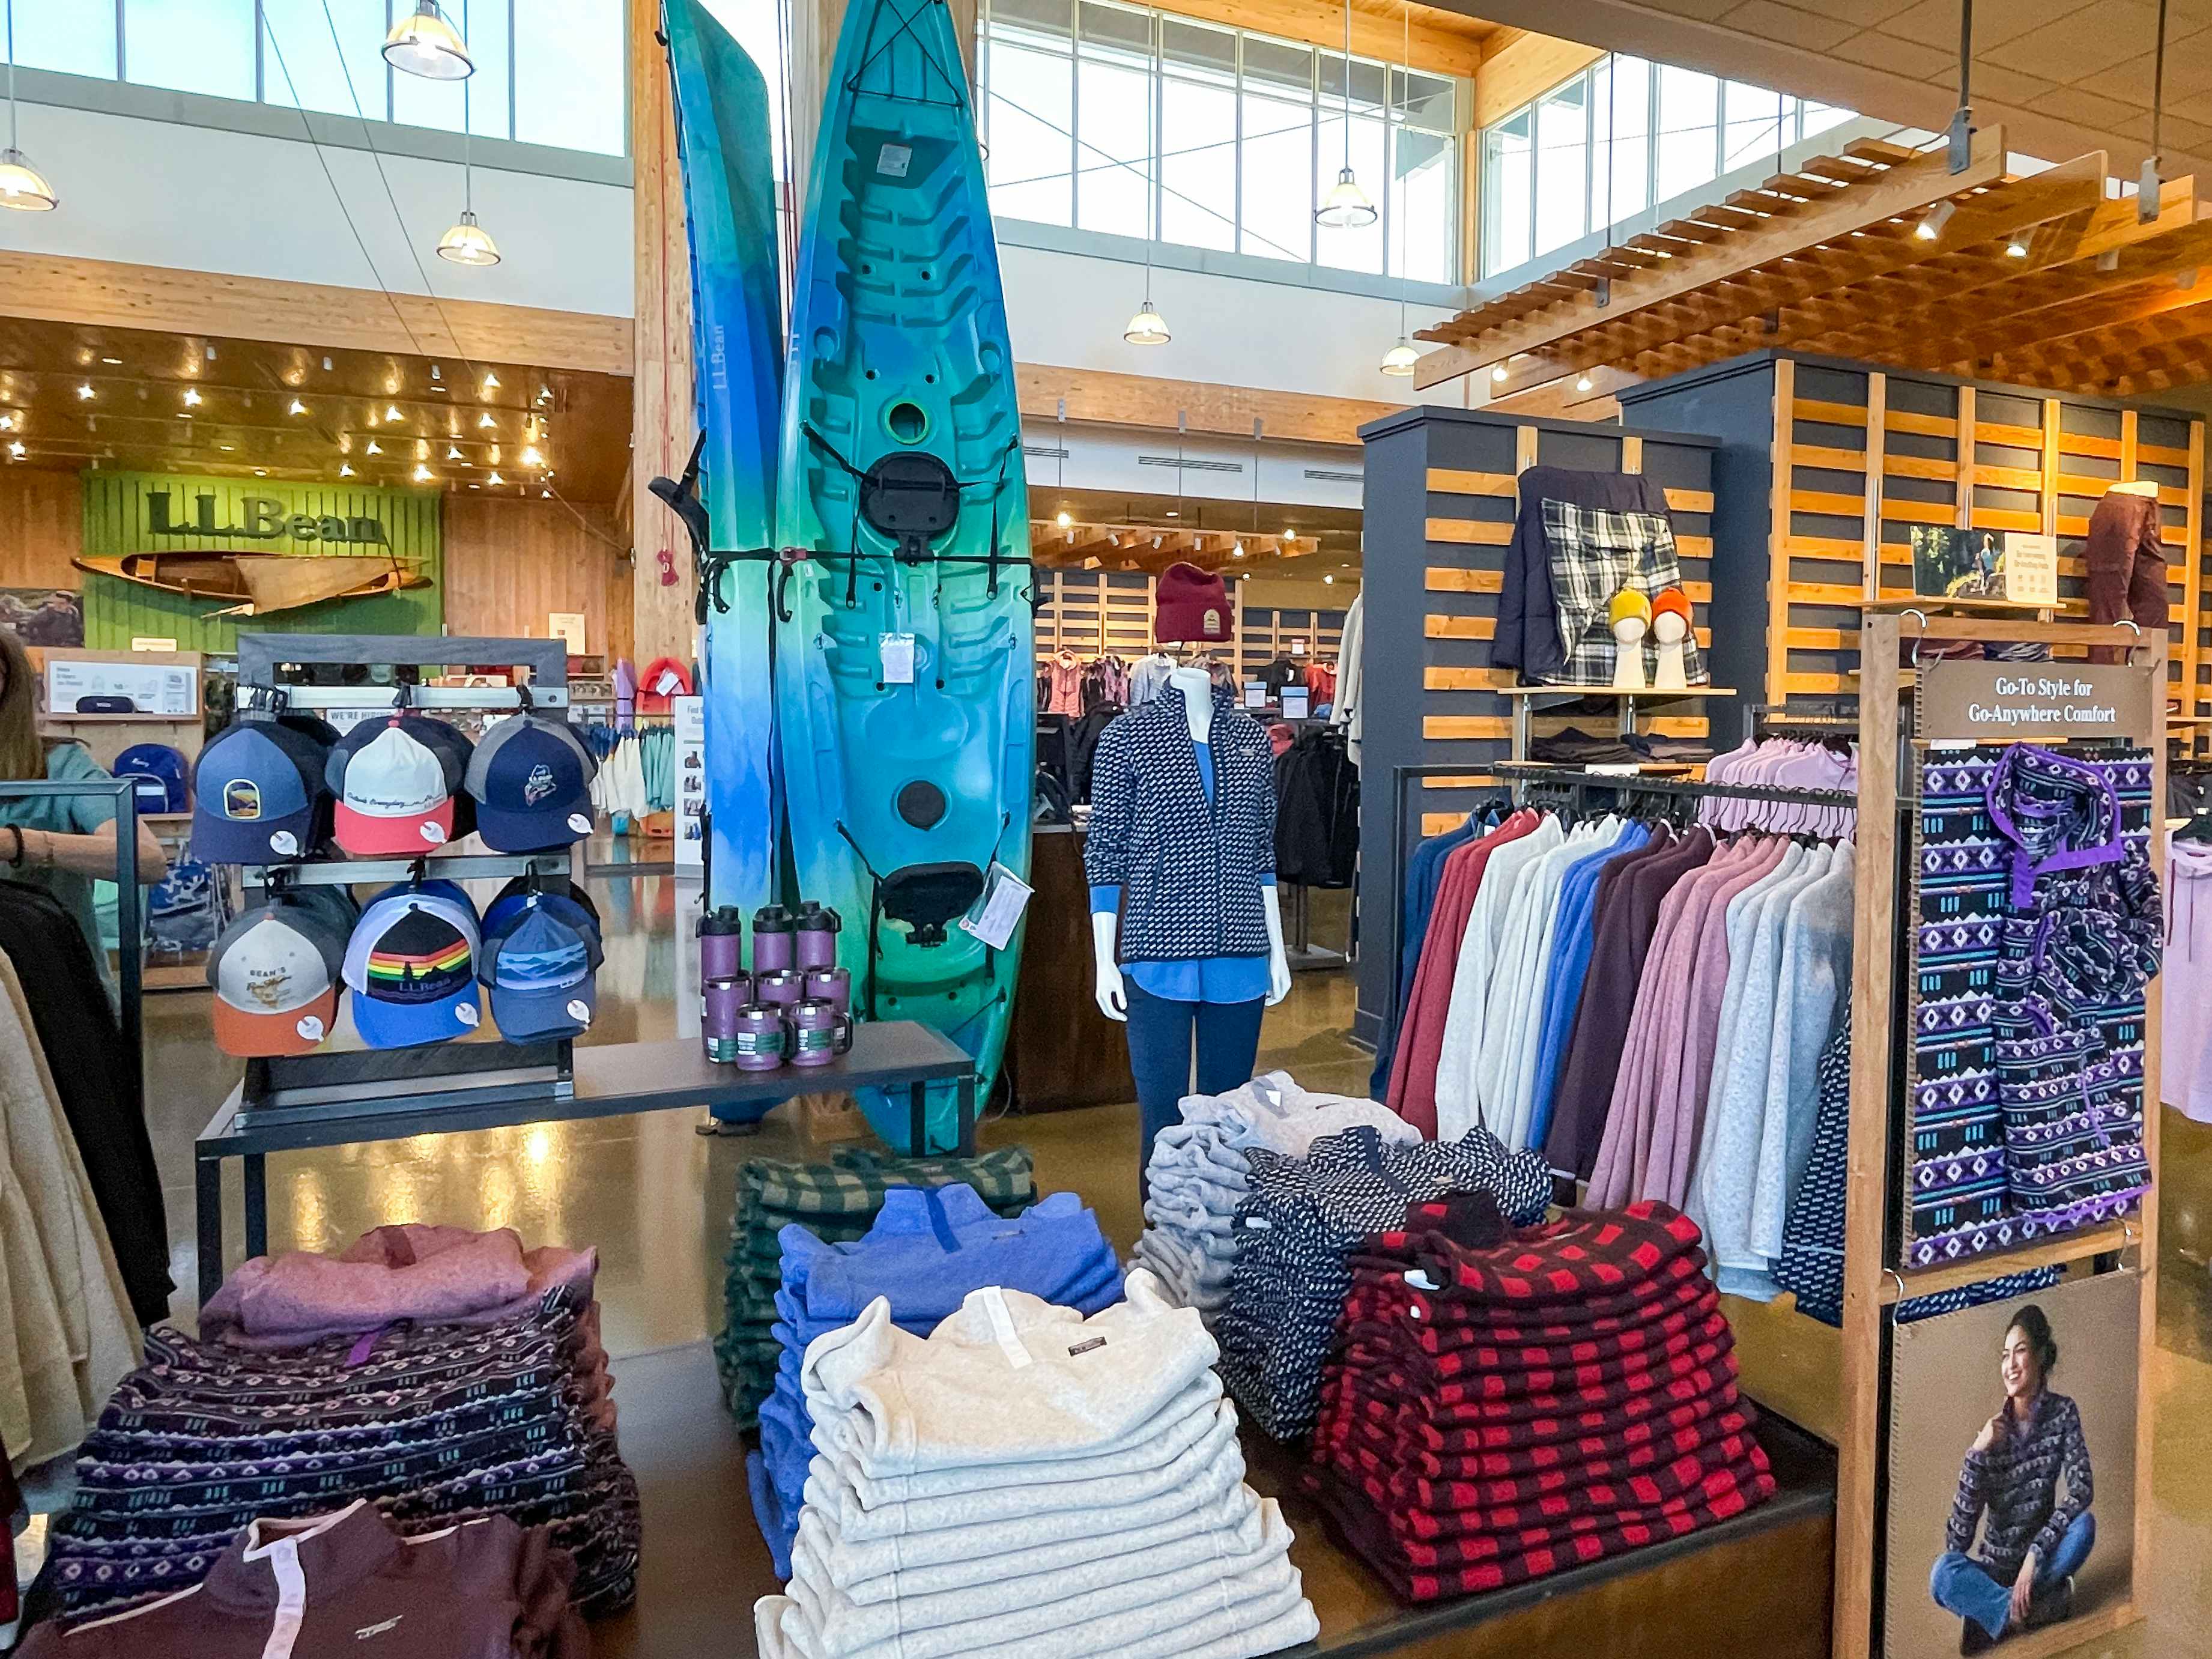 The inside of an L.L.Bean store showing products on display.